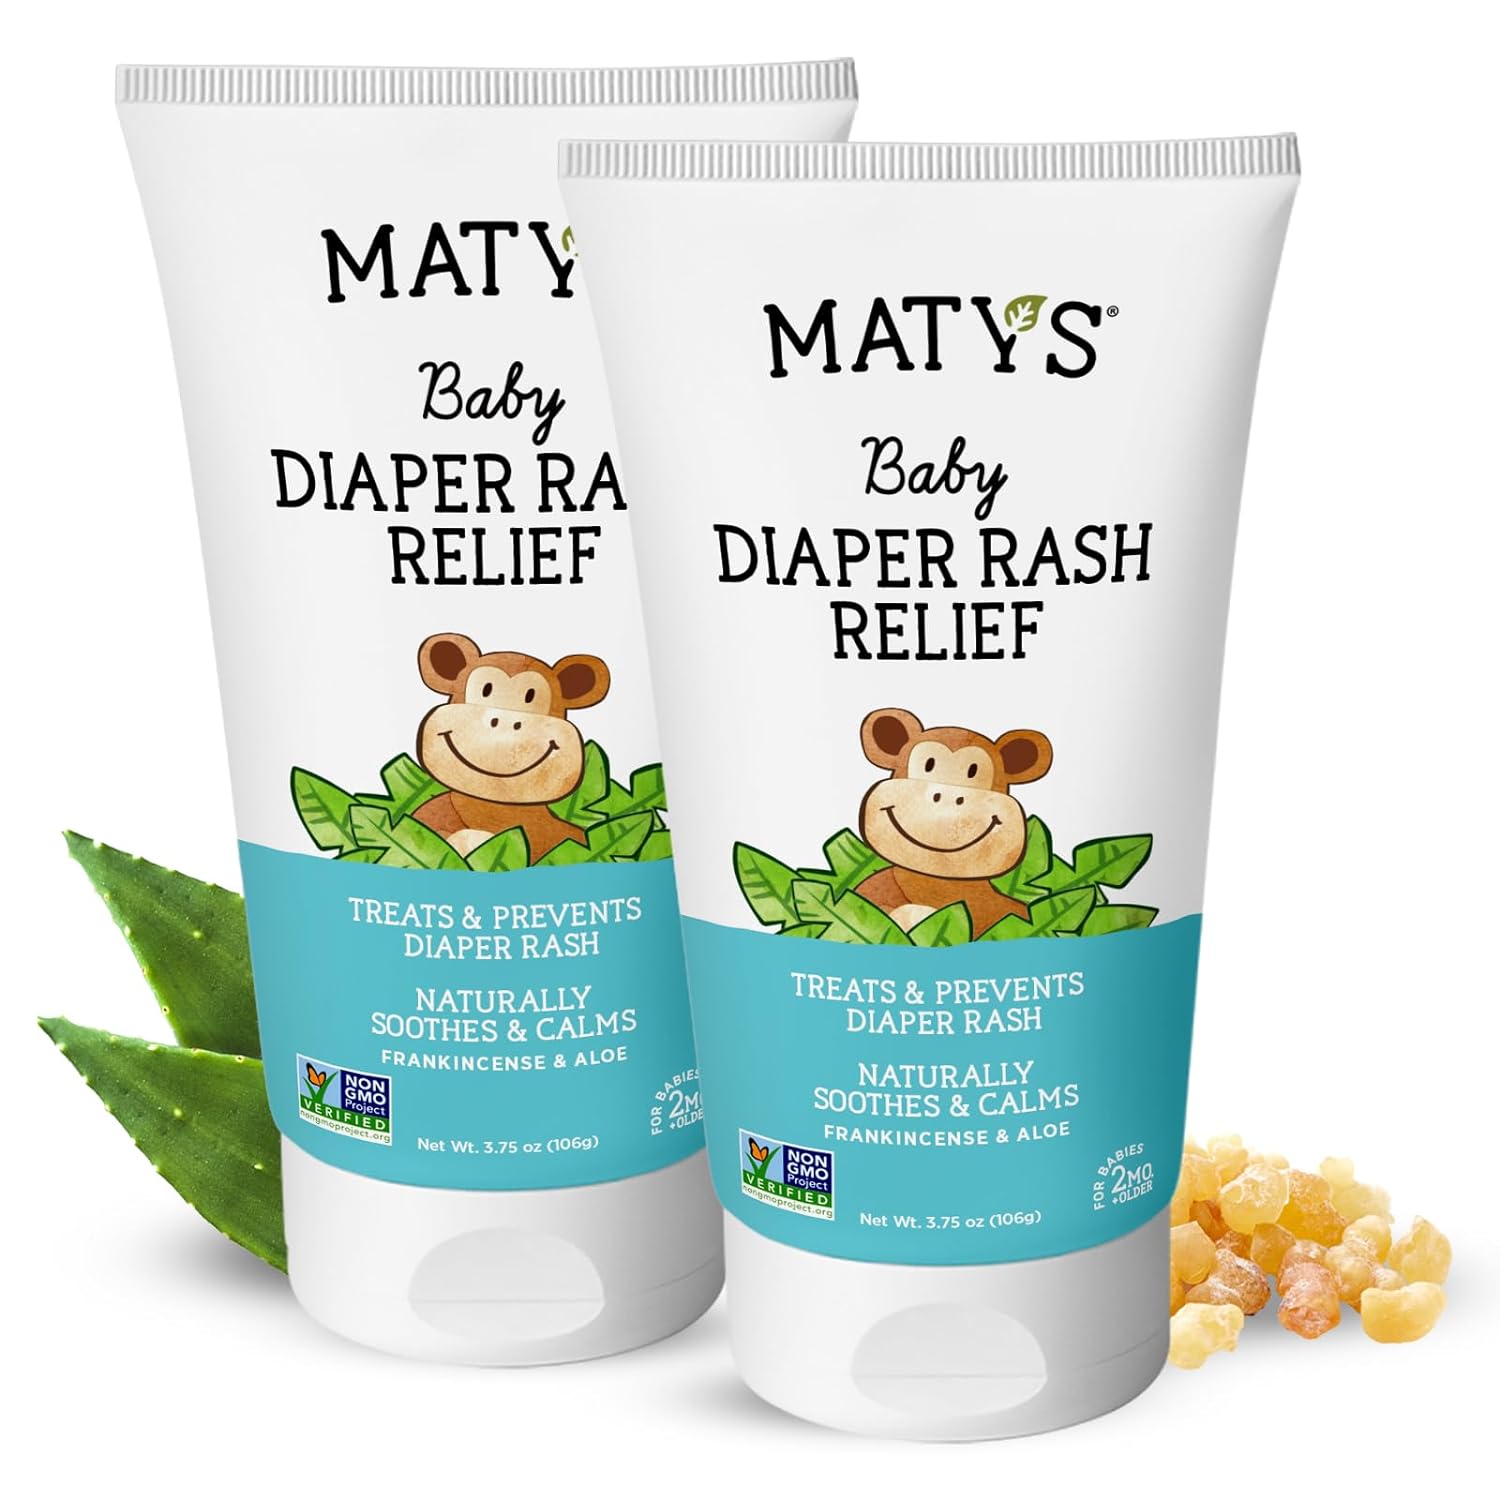 Matys Baby Diaper Rash Relief Ointment, Diaper Cream for Babies 2 Months Old +, Soothing Balm Protection for Chafed Skin, Clean Nurturing Lavender & Aloe w/Zinc, Petroleum Free, 2 Pack, 3.75 oz each